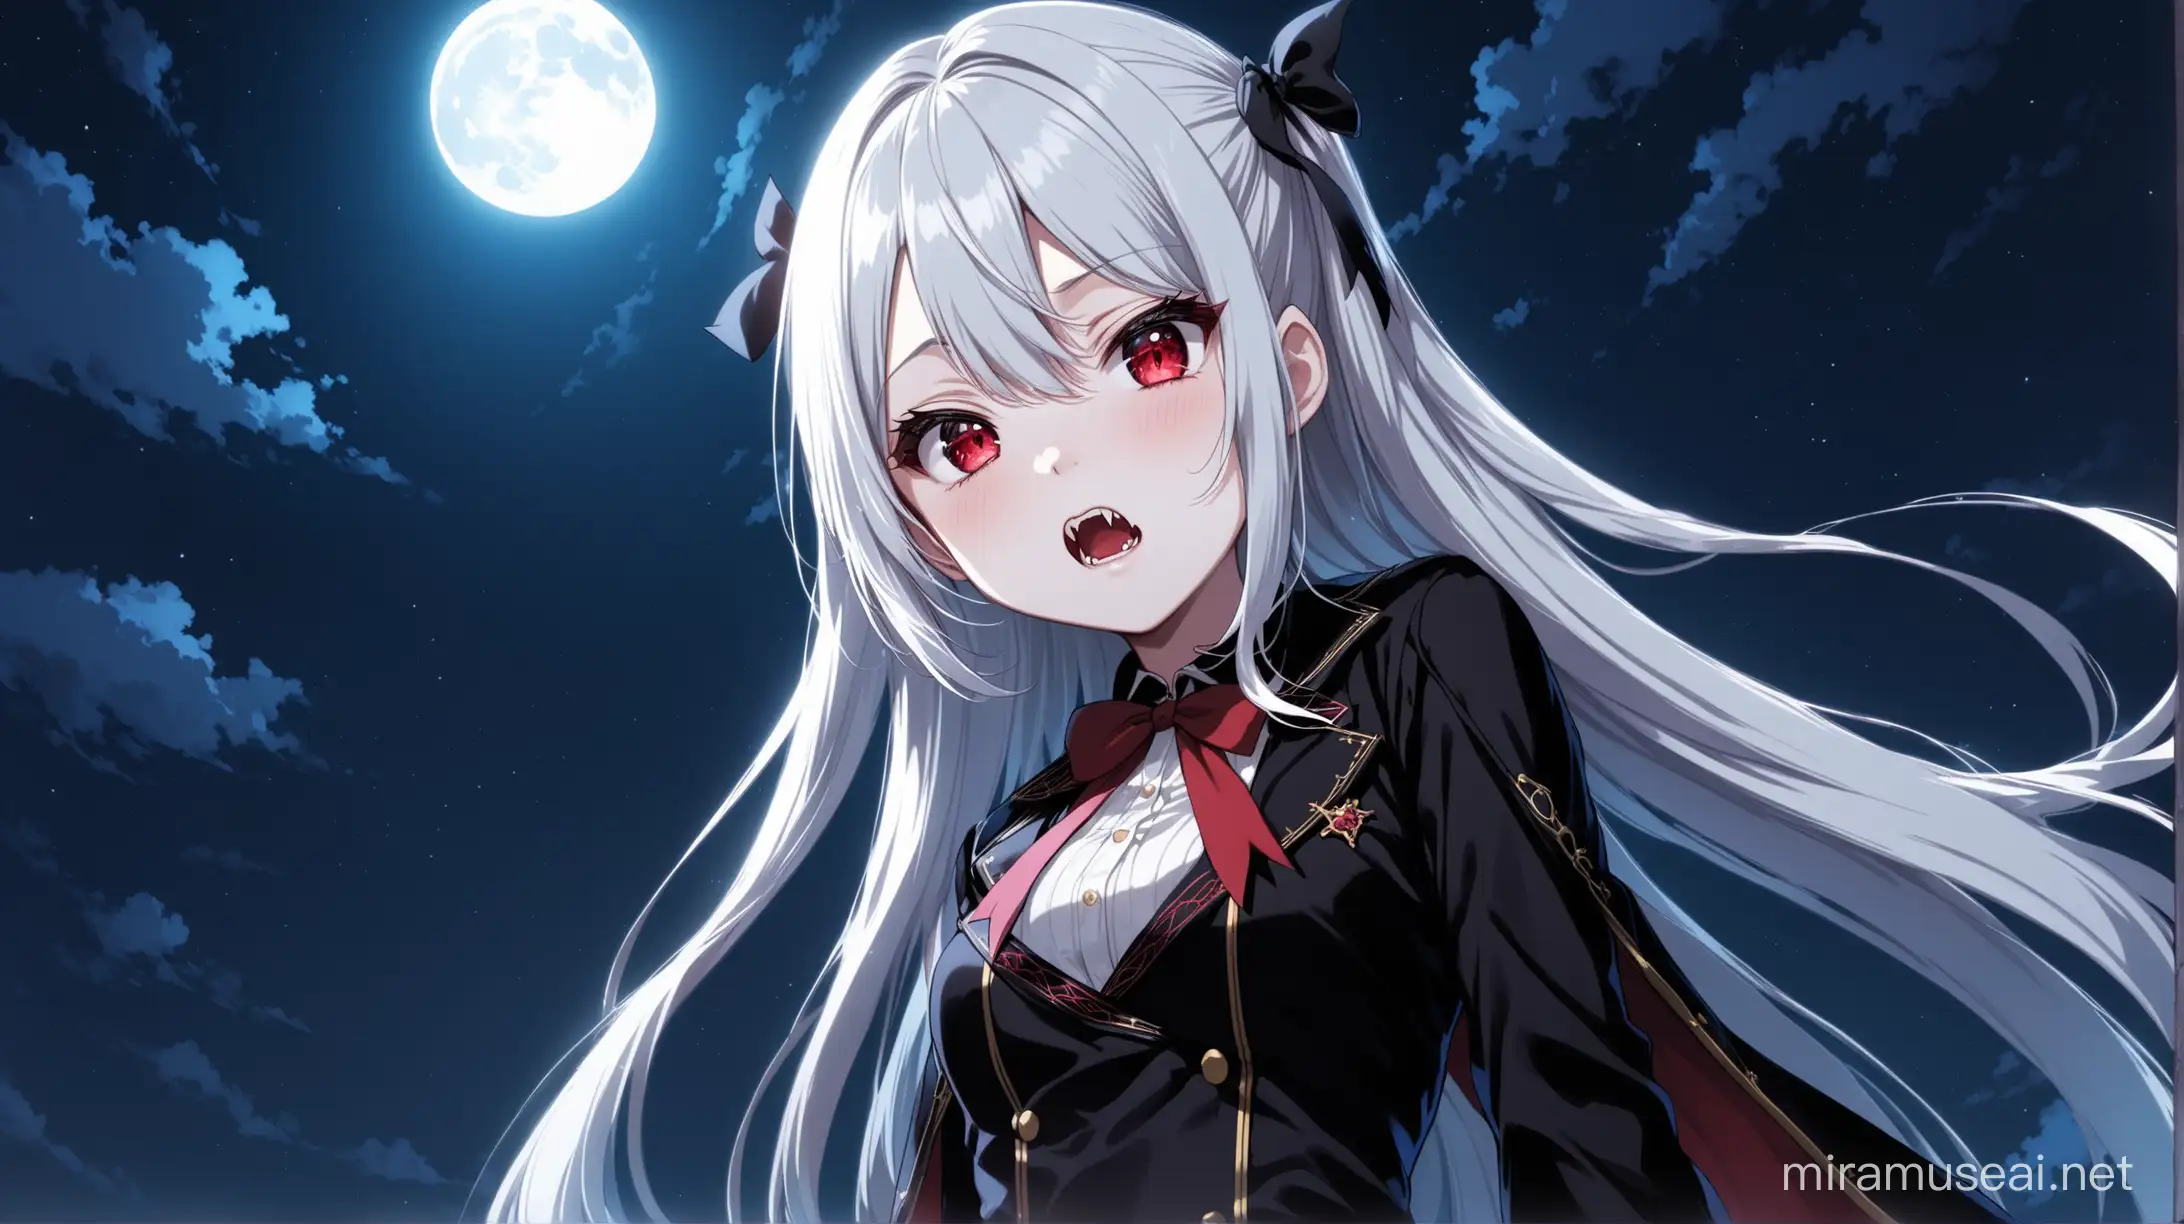 Cute Vampire Girl Hina Sorasaki with Silver Hair and Red Eyes on School Grounds at Night